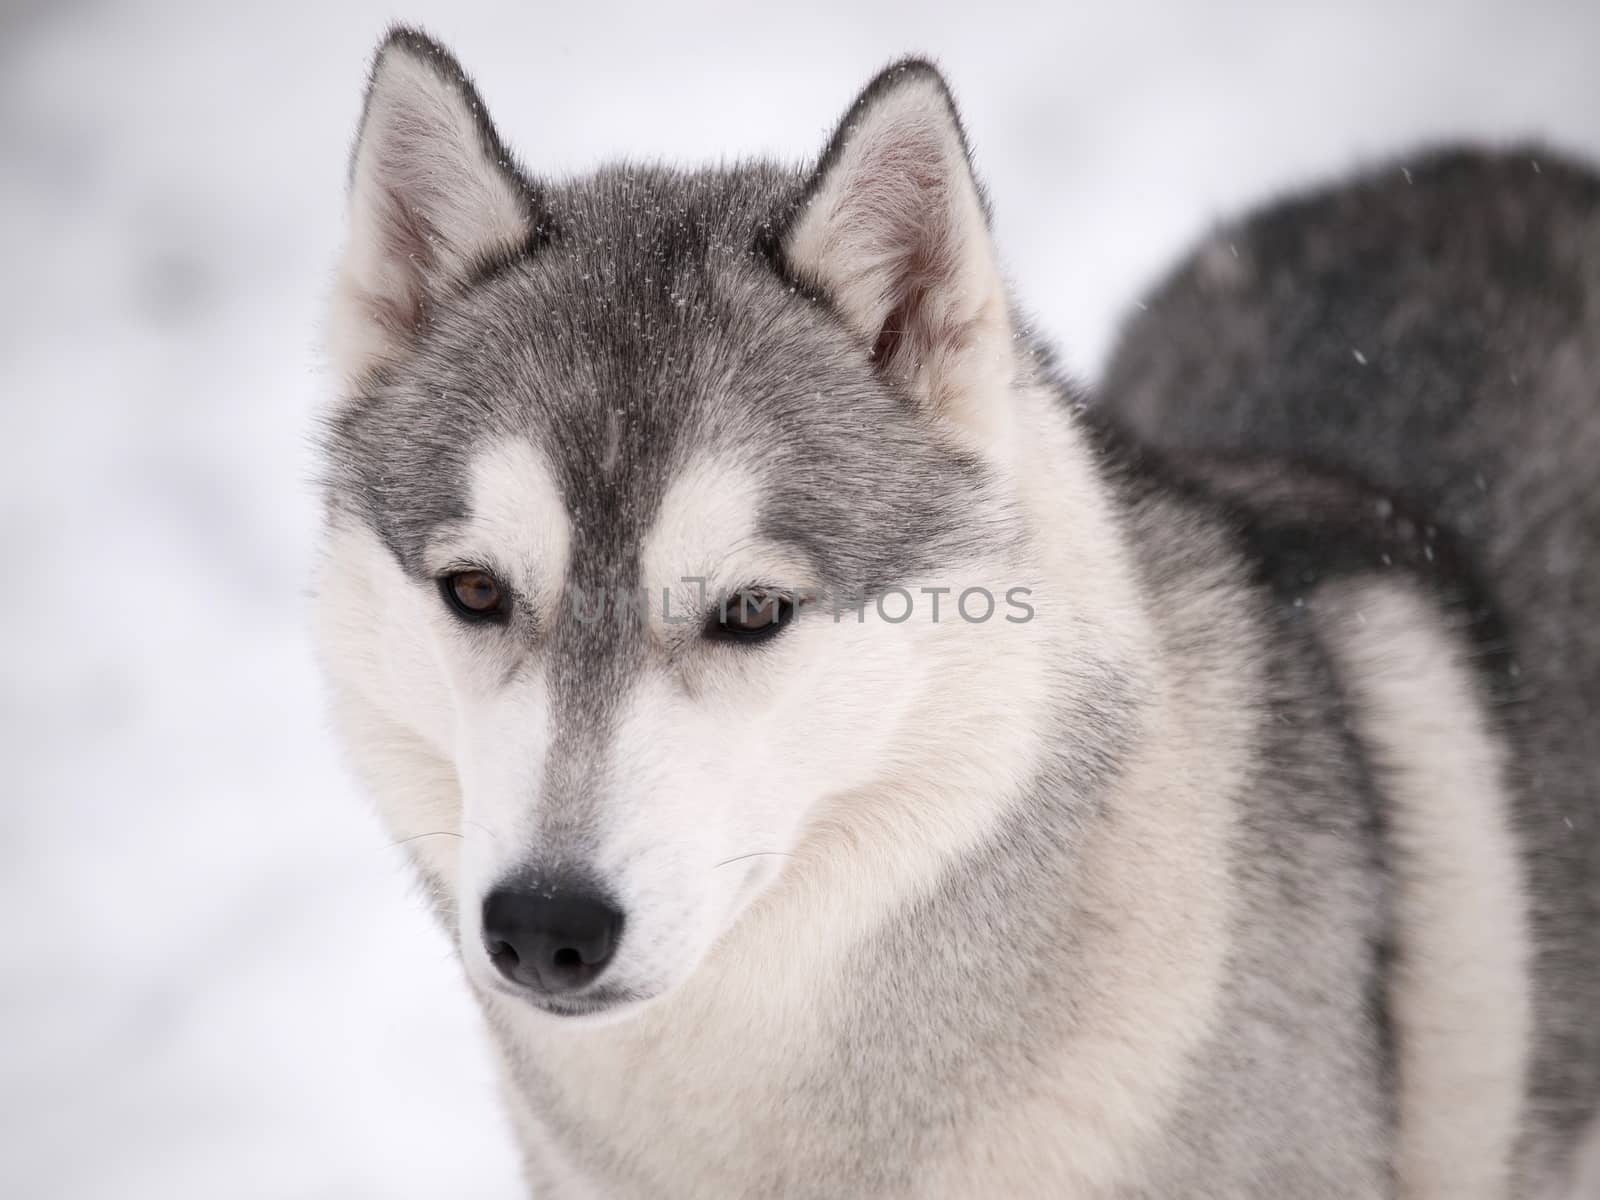 Husky dog outdoors on a snowy winter day